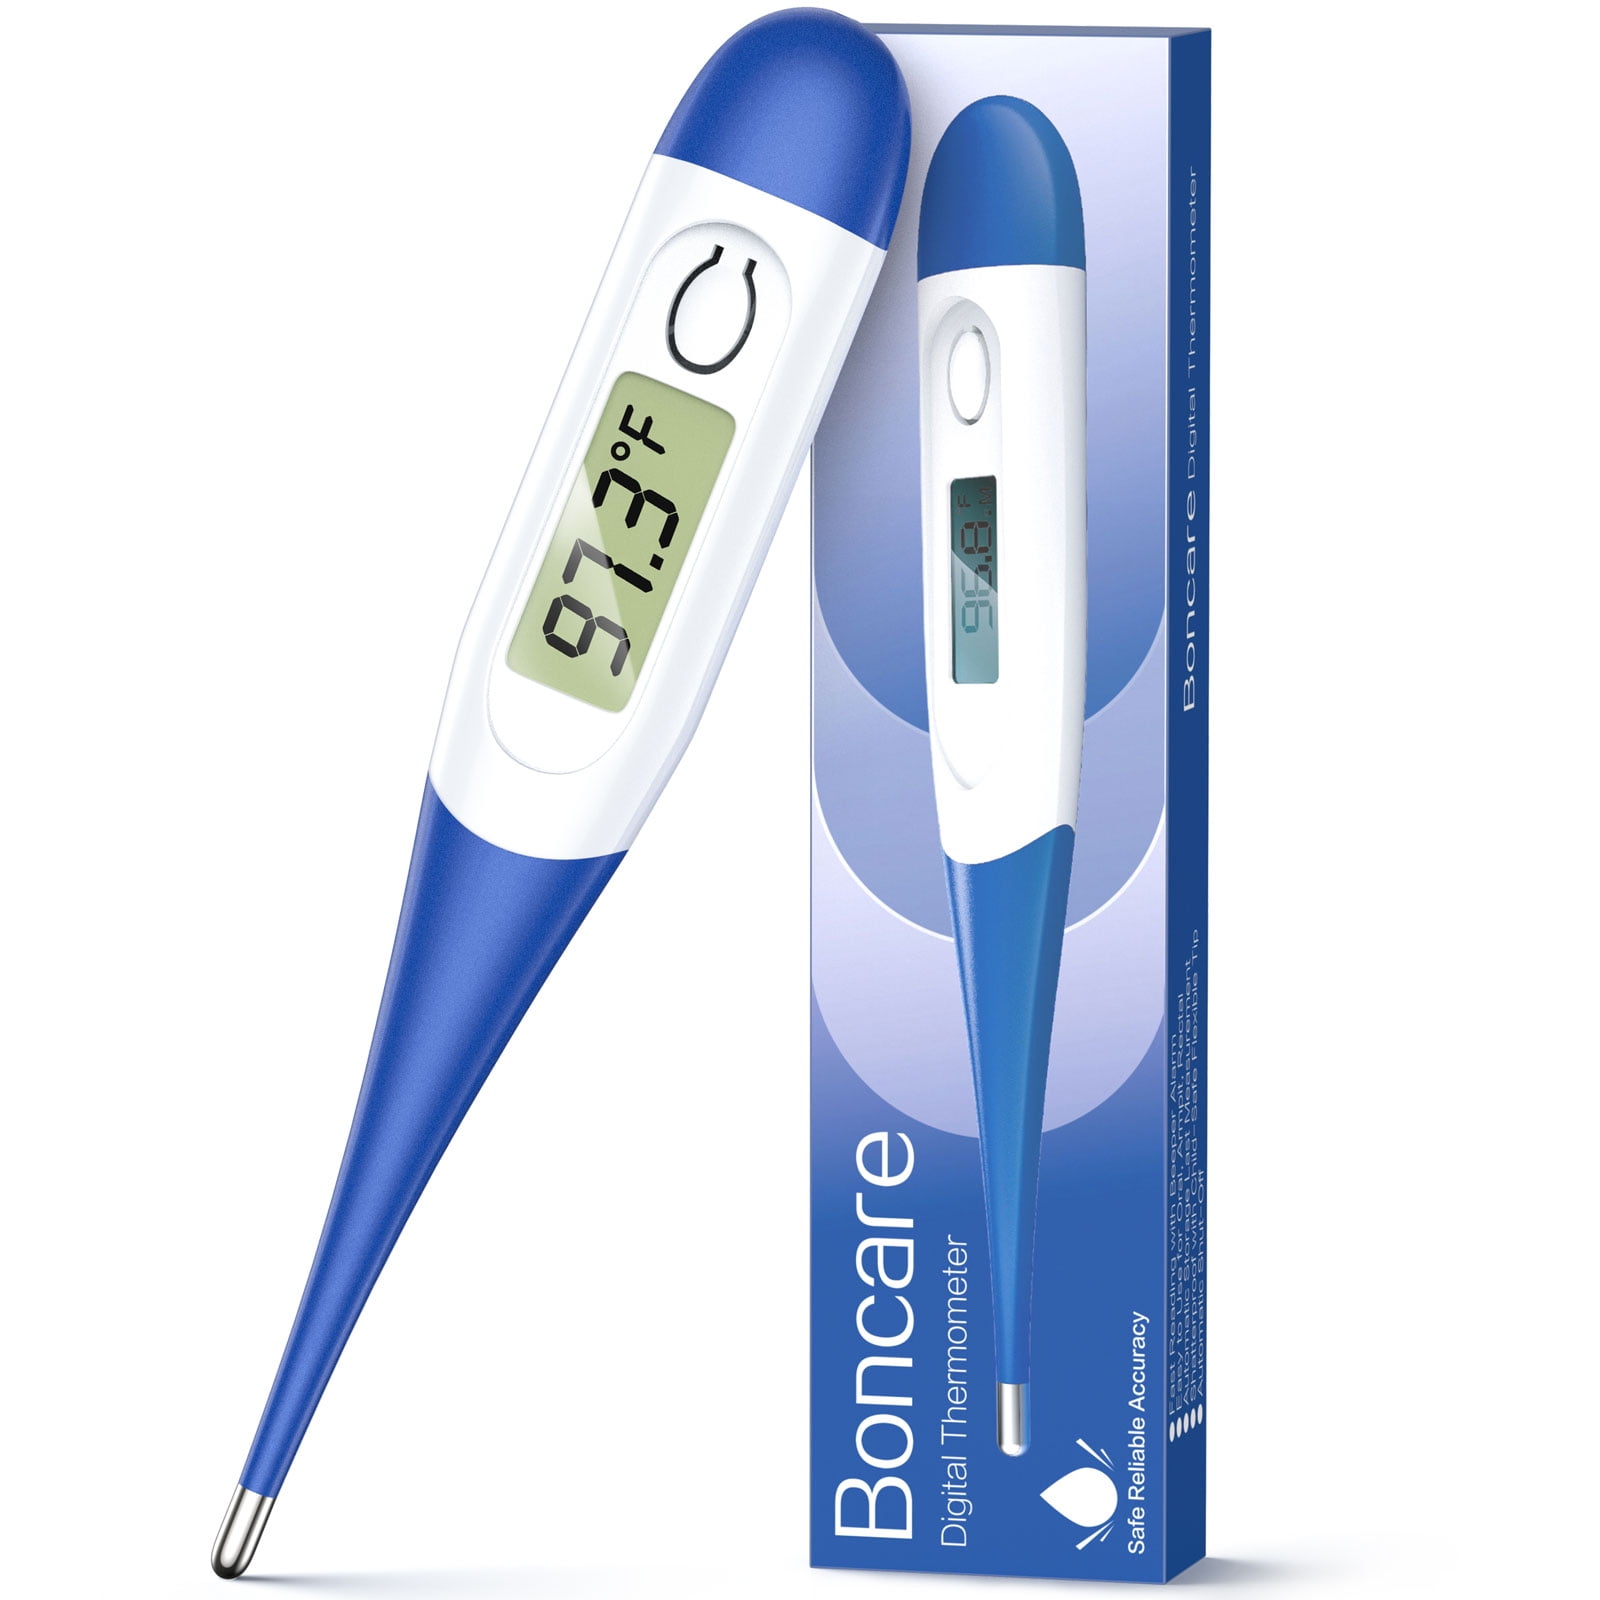 Home Digital LCD Medical Thermometer Mouth Underarm Baby Body Temperature 